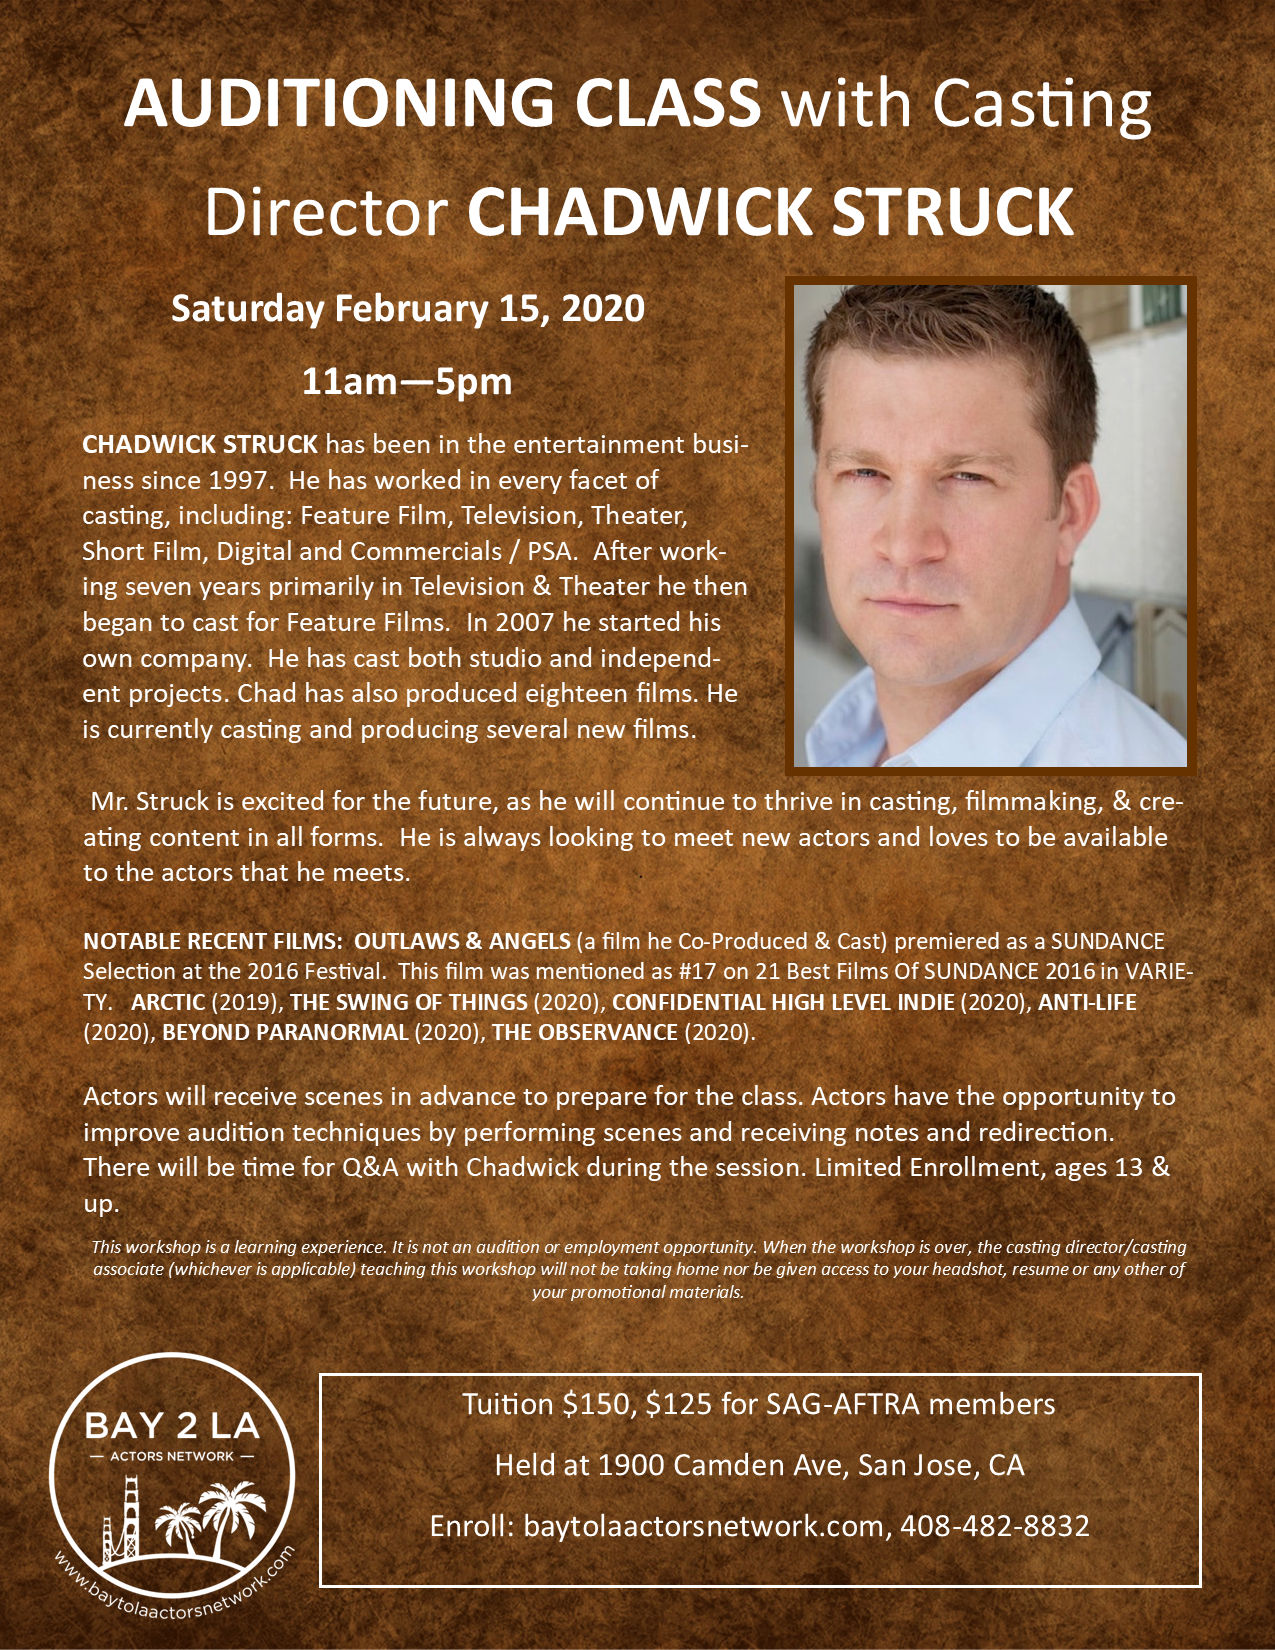 Auditioning Class with Chadwick Struck